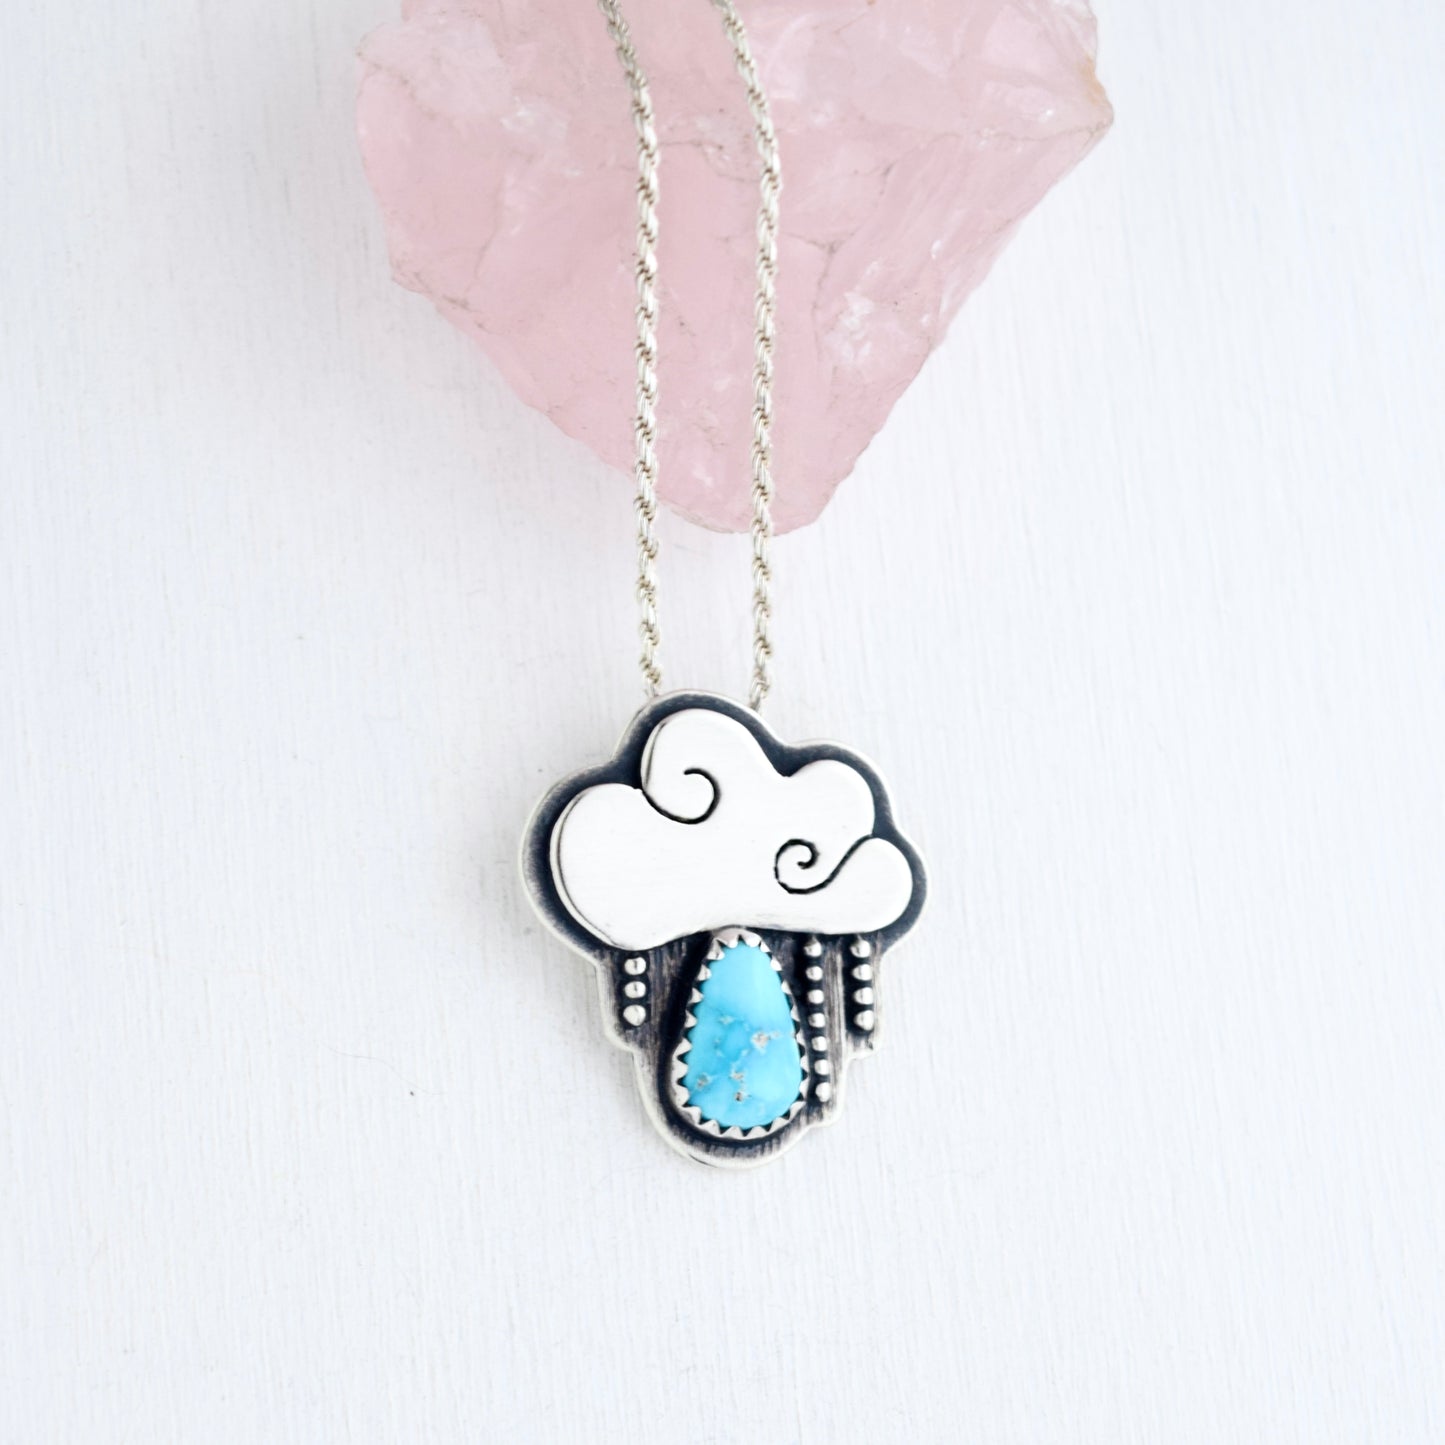 Little Dark Cloud Necklace with White Water Turquoise with Pyrite inclusions